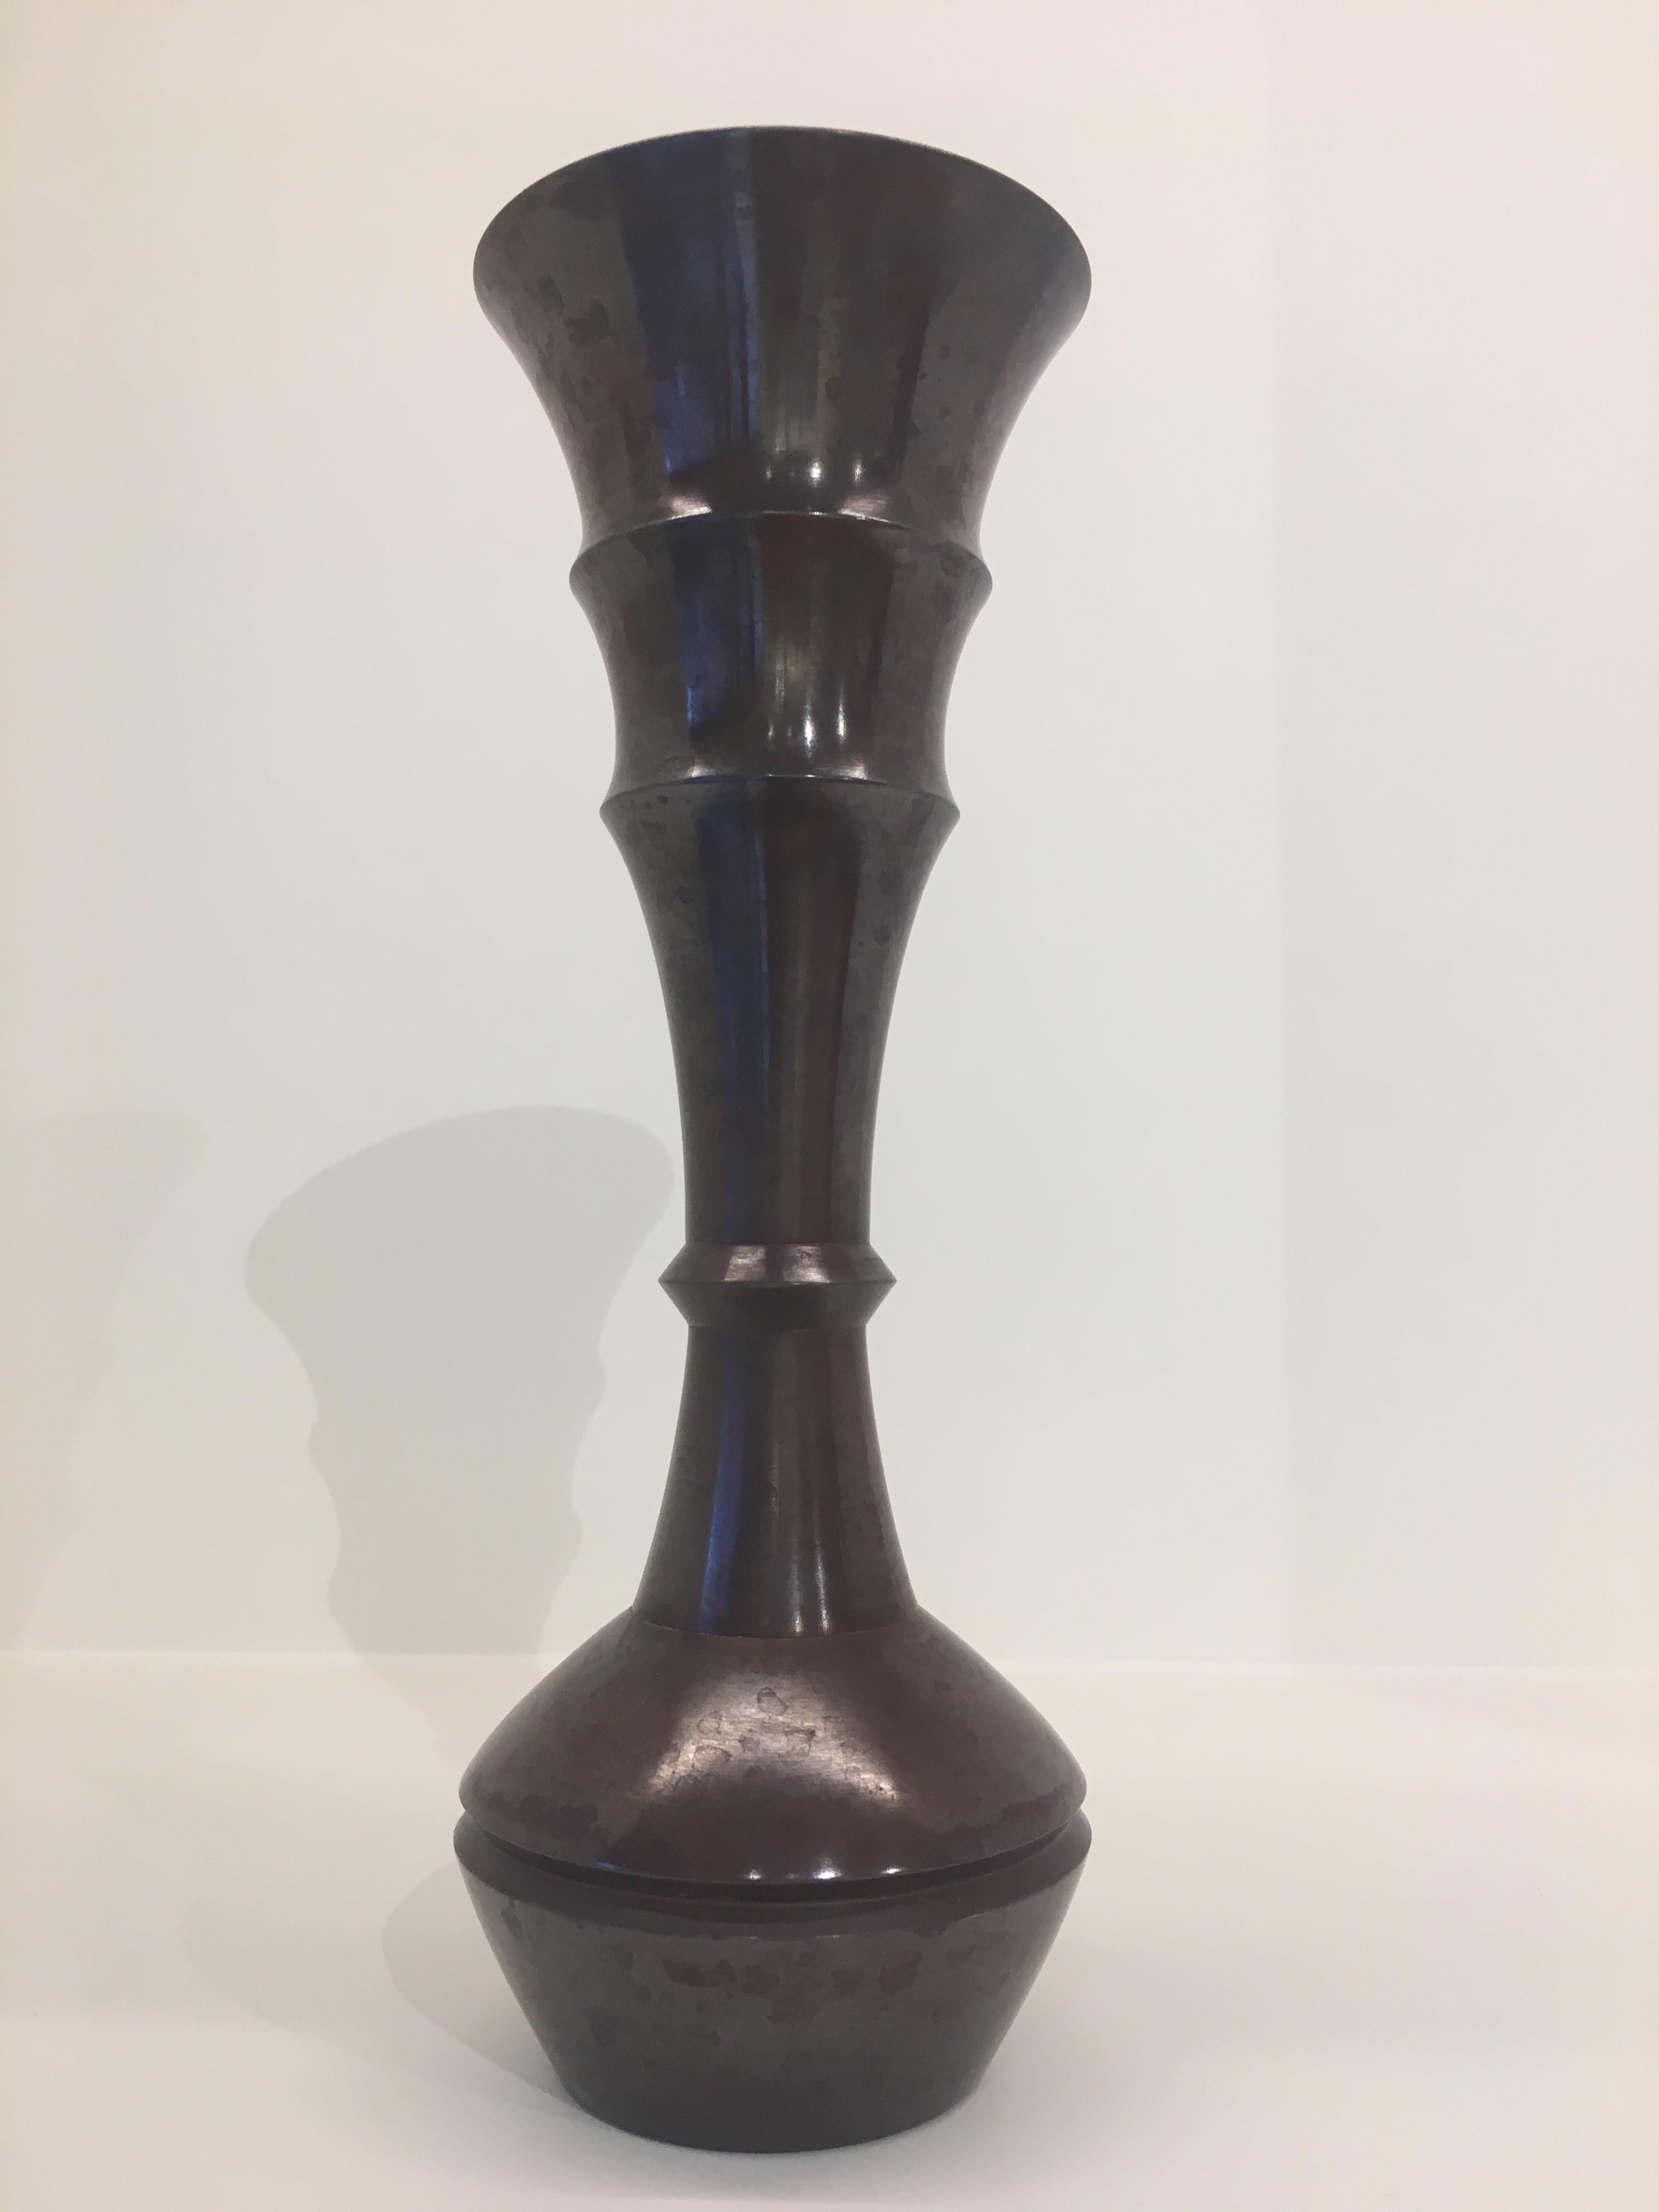 Elegant Showa period Japanese Seido Bronze vase. Engraved signature at the bottom.

Nakajima Yasumi, also known as Yasumi II, learned traditional metal techniques from his family that had been working with a particularly intensely coloured bronze